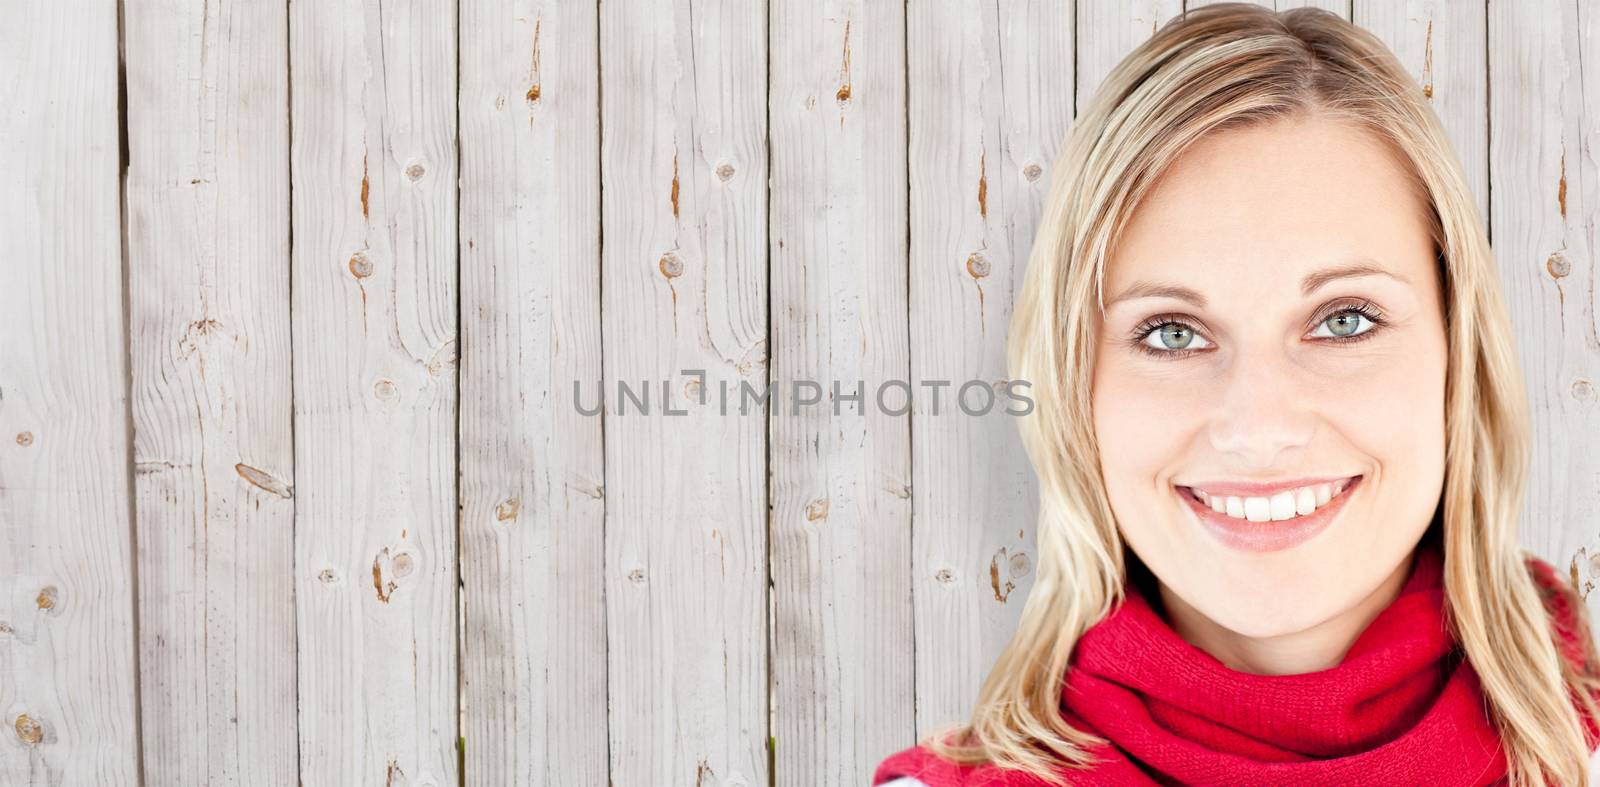 Portrait of a beautiful woman with a red scarf smiling at the camera against wooden background